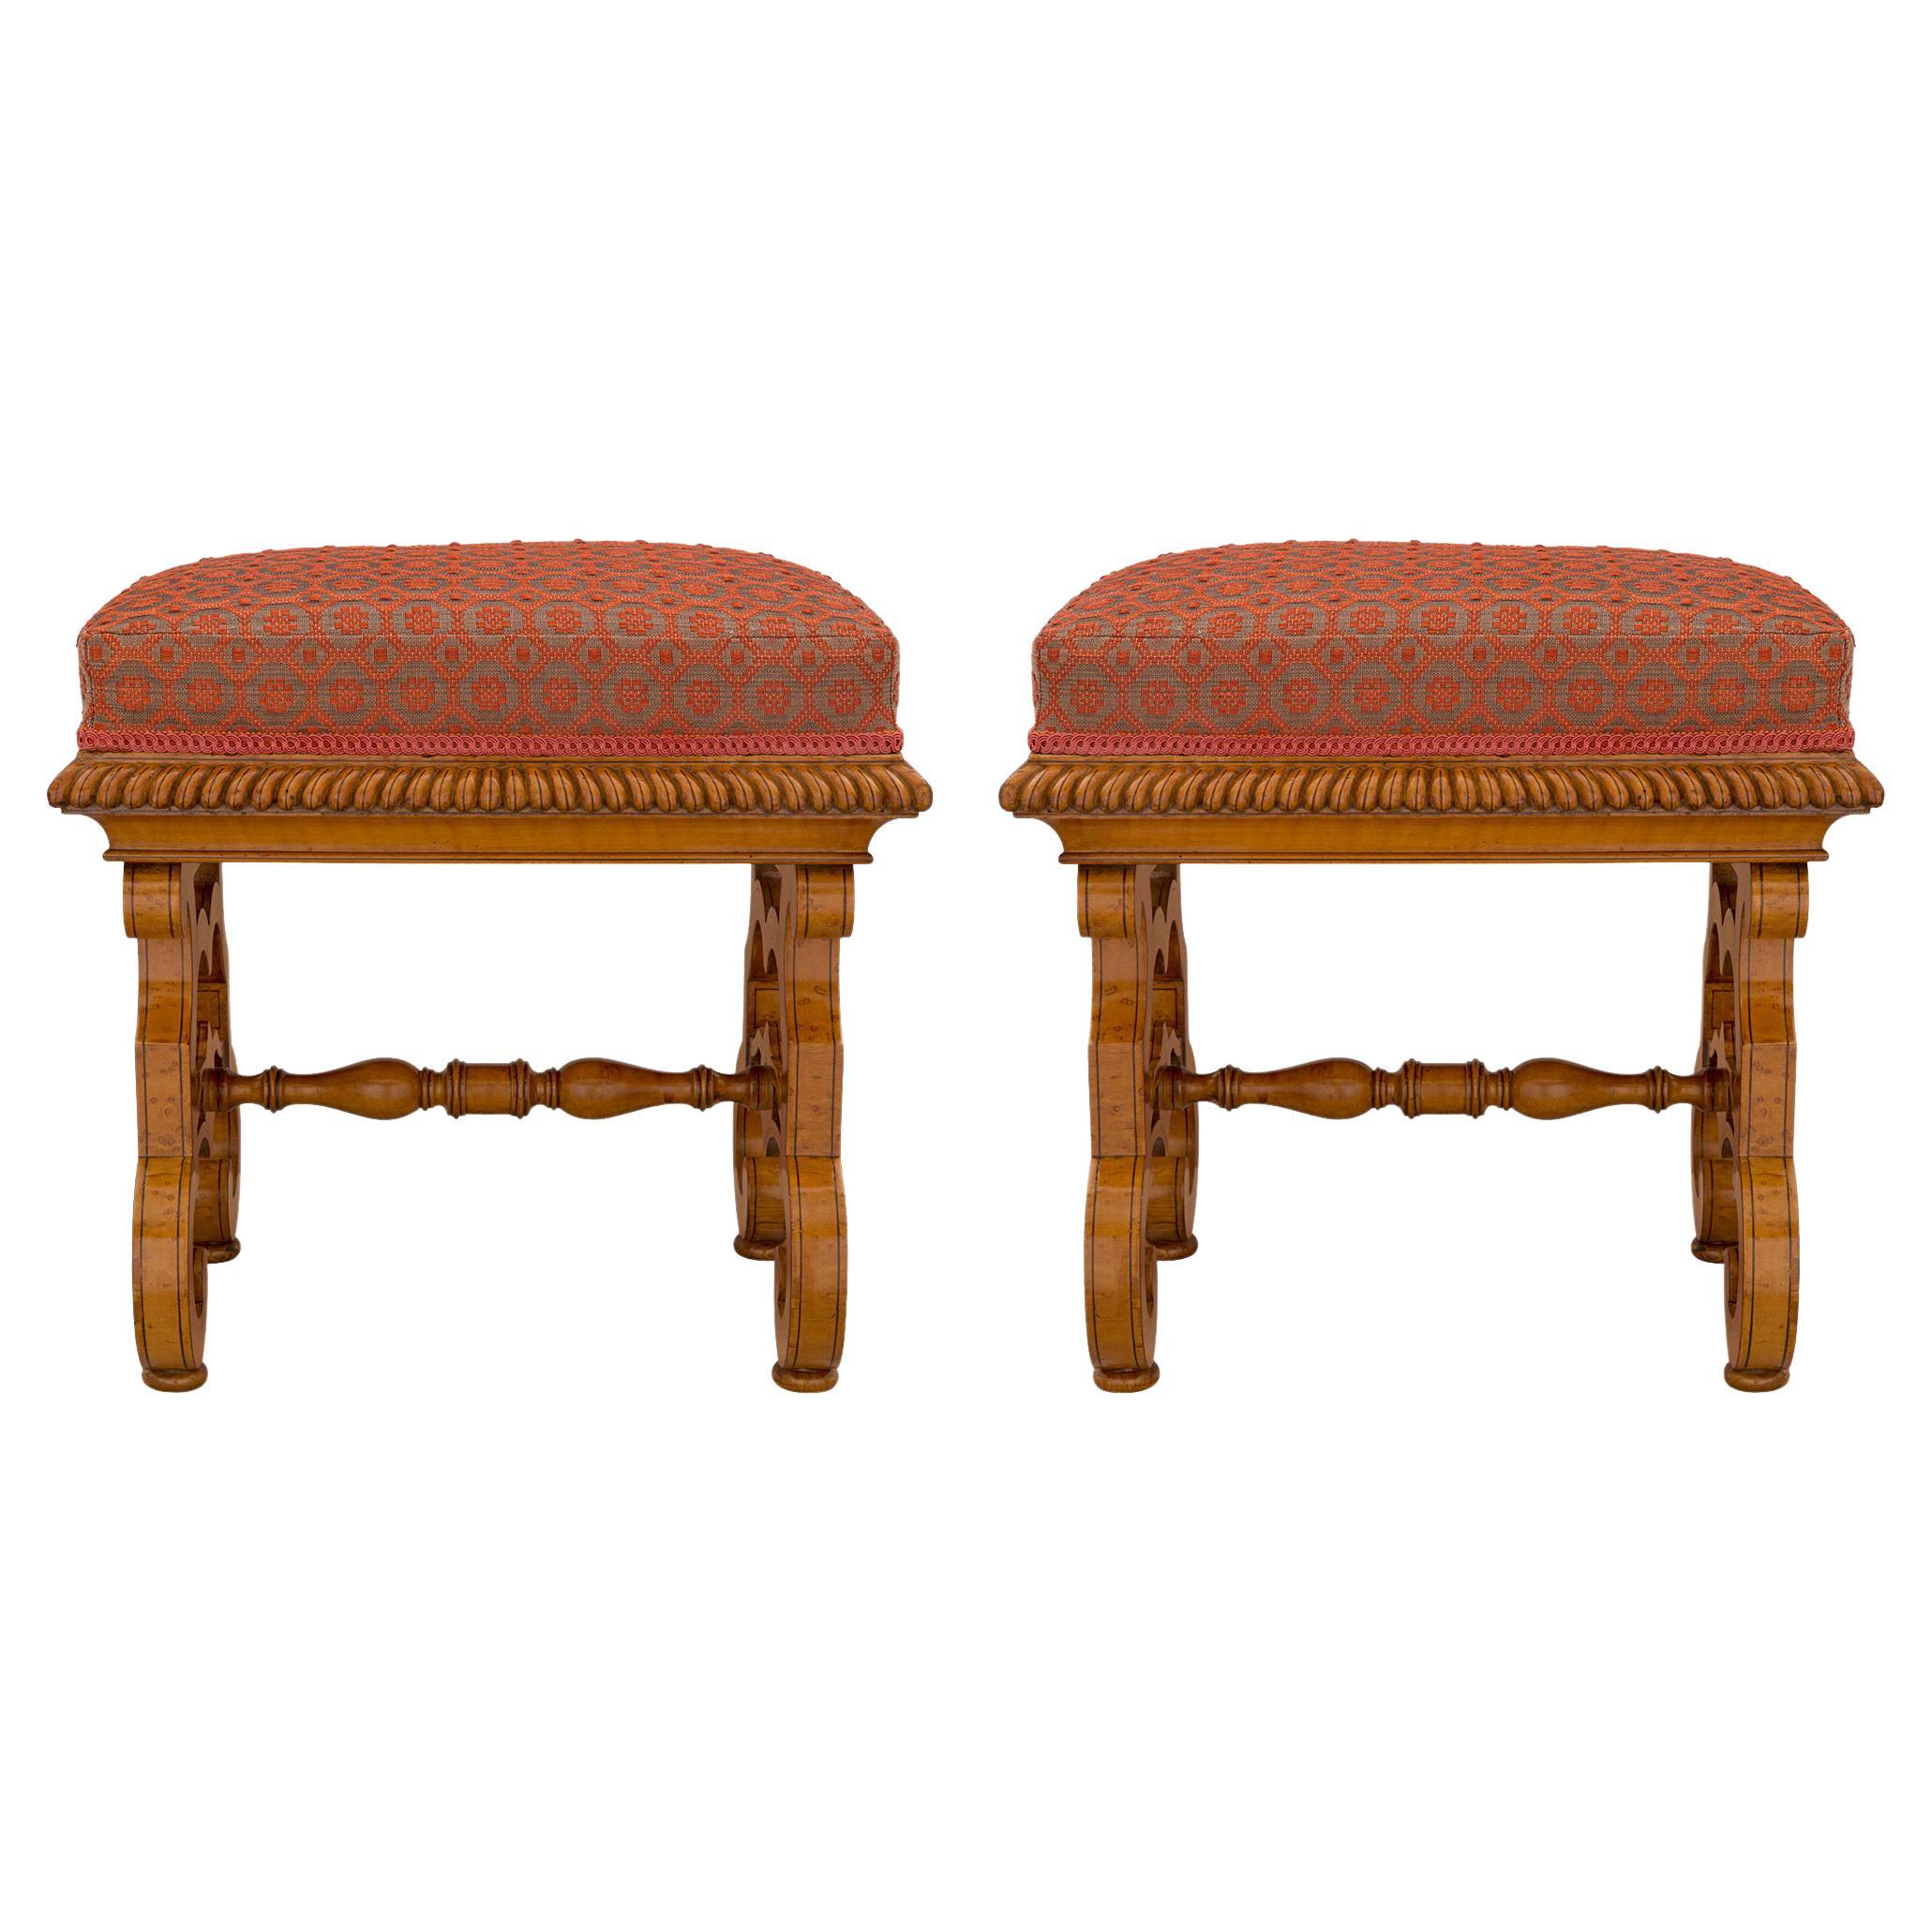 Pair of French 19th Charles X Style Burl Maple Benches